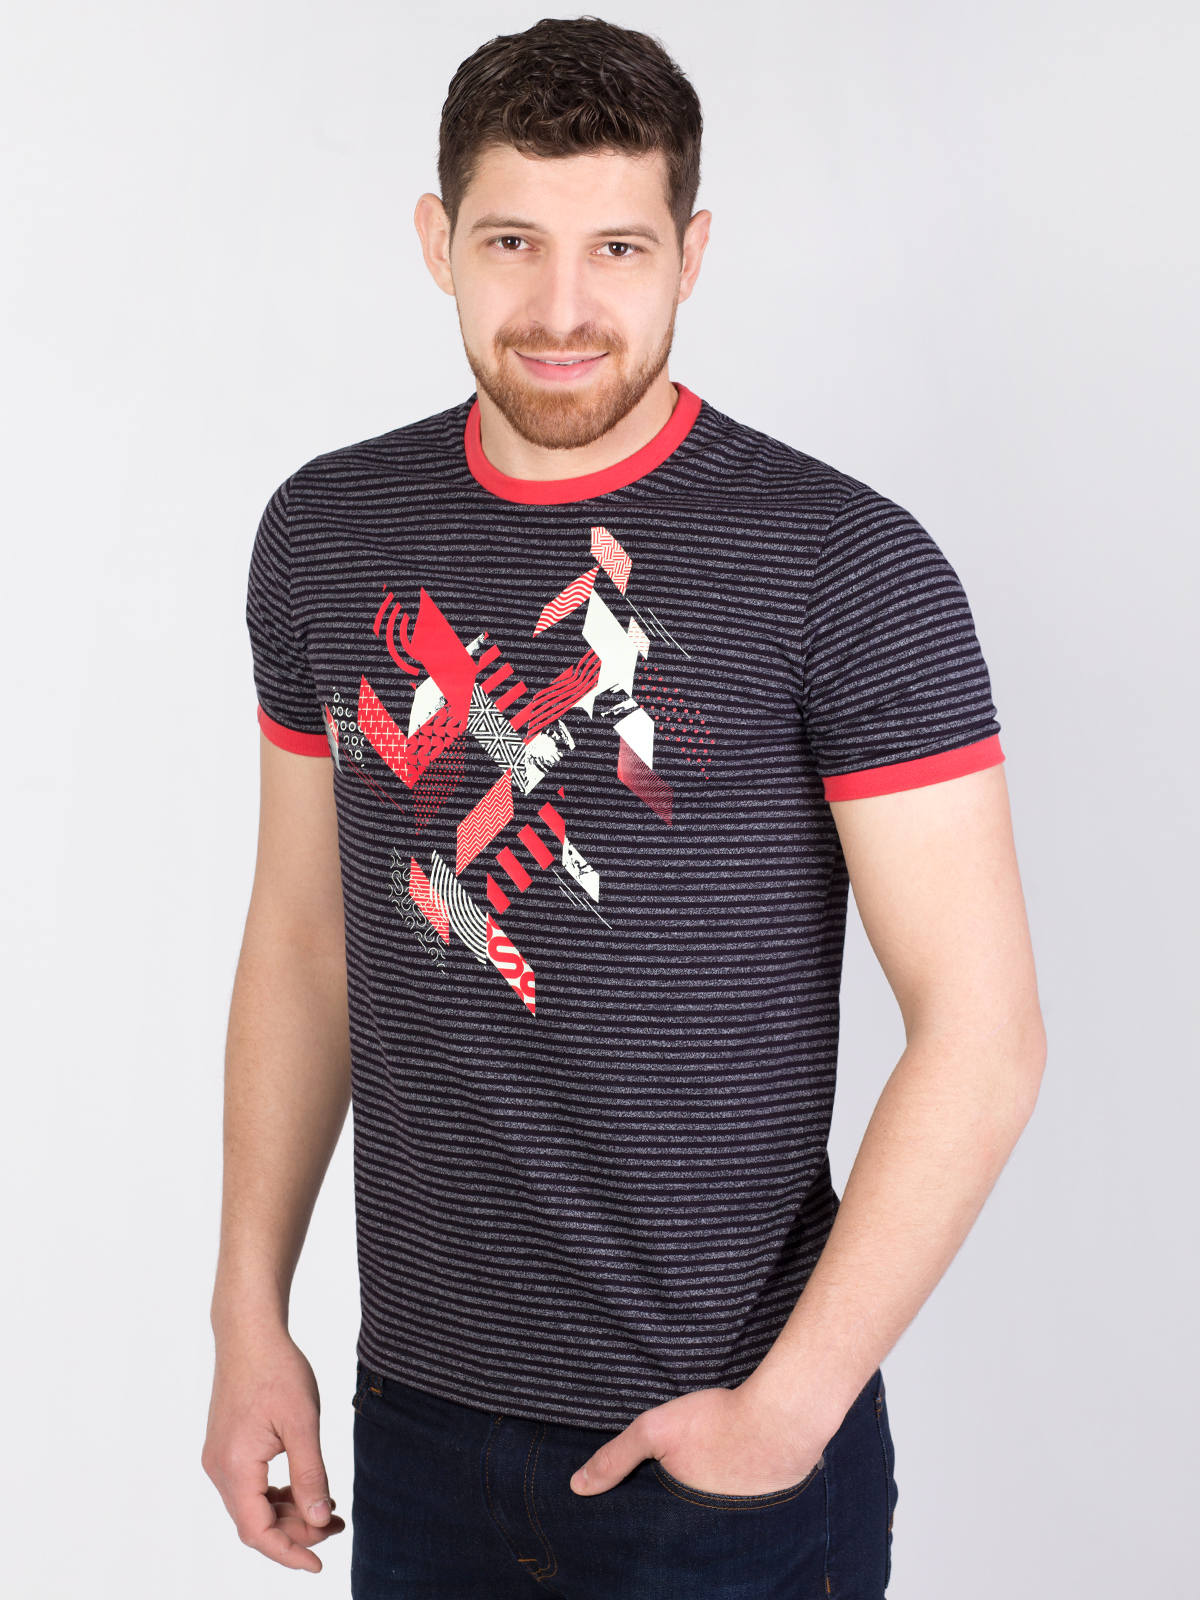 Tshirt in black with bright red accents - 96404 € 23.62 img2